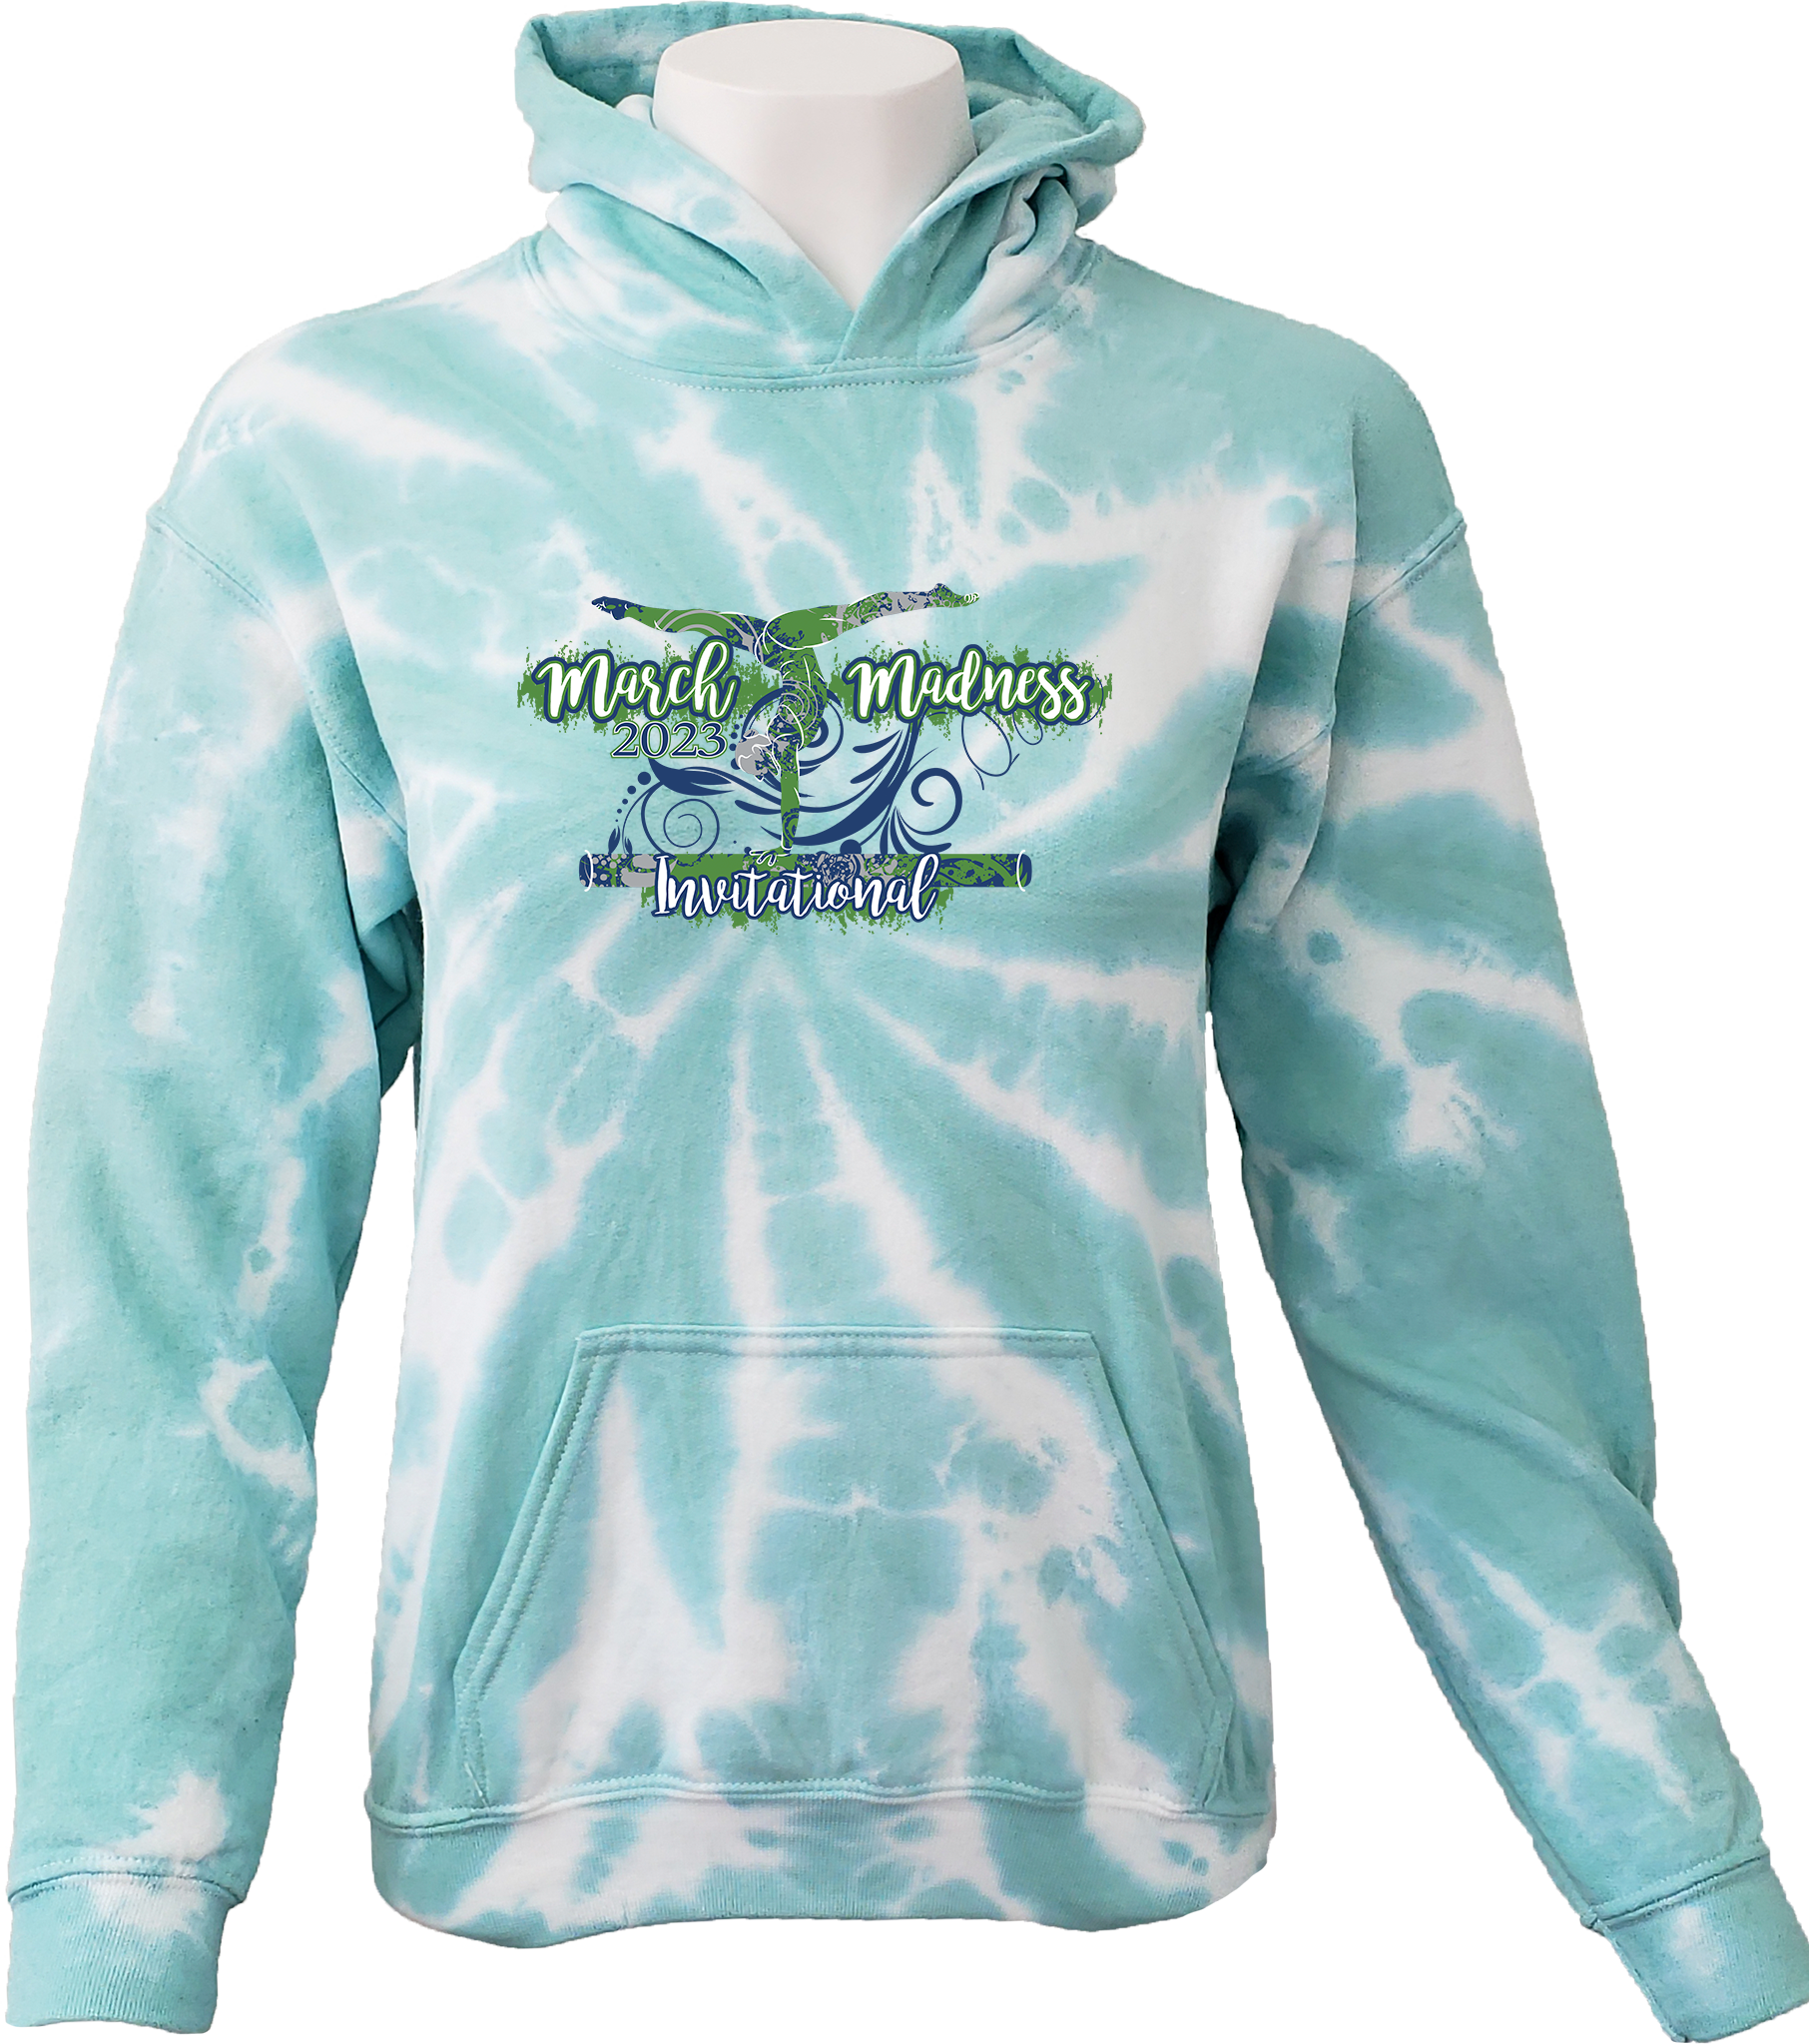 TIE-DYE HOODIES - 2023 March Madness Invitational